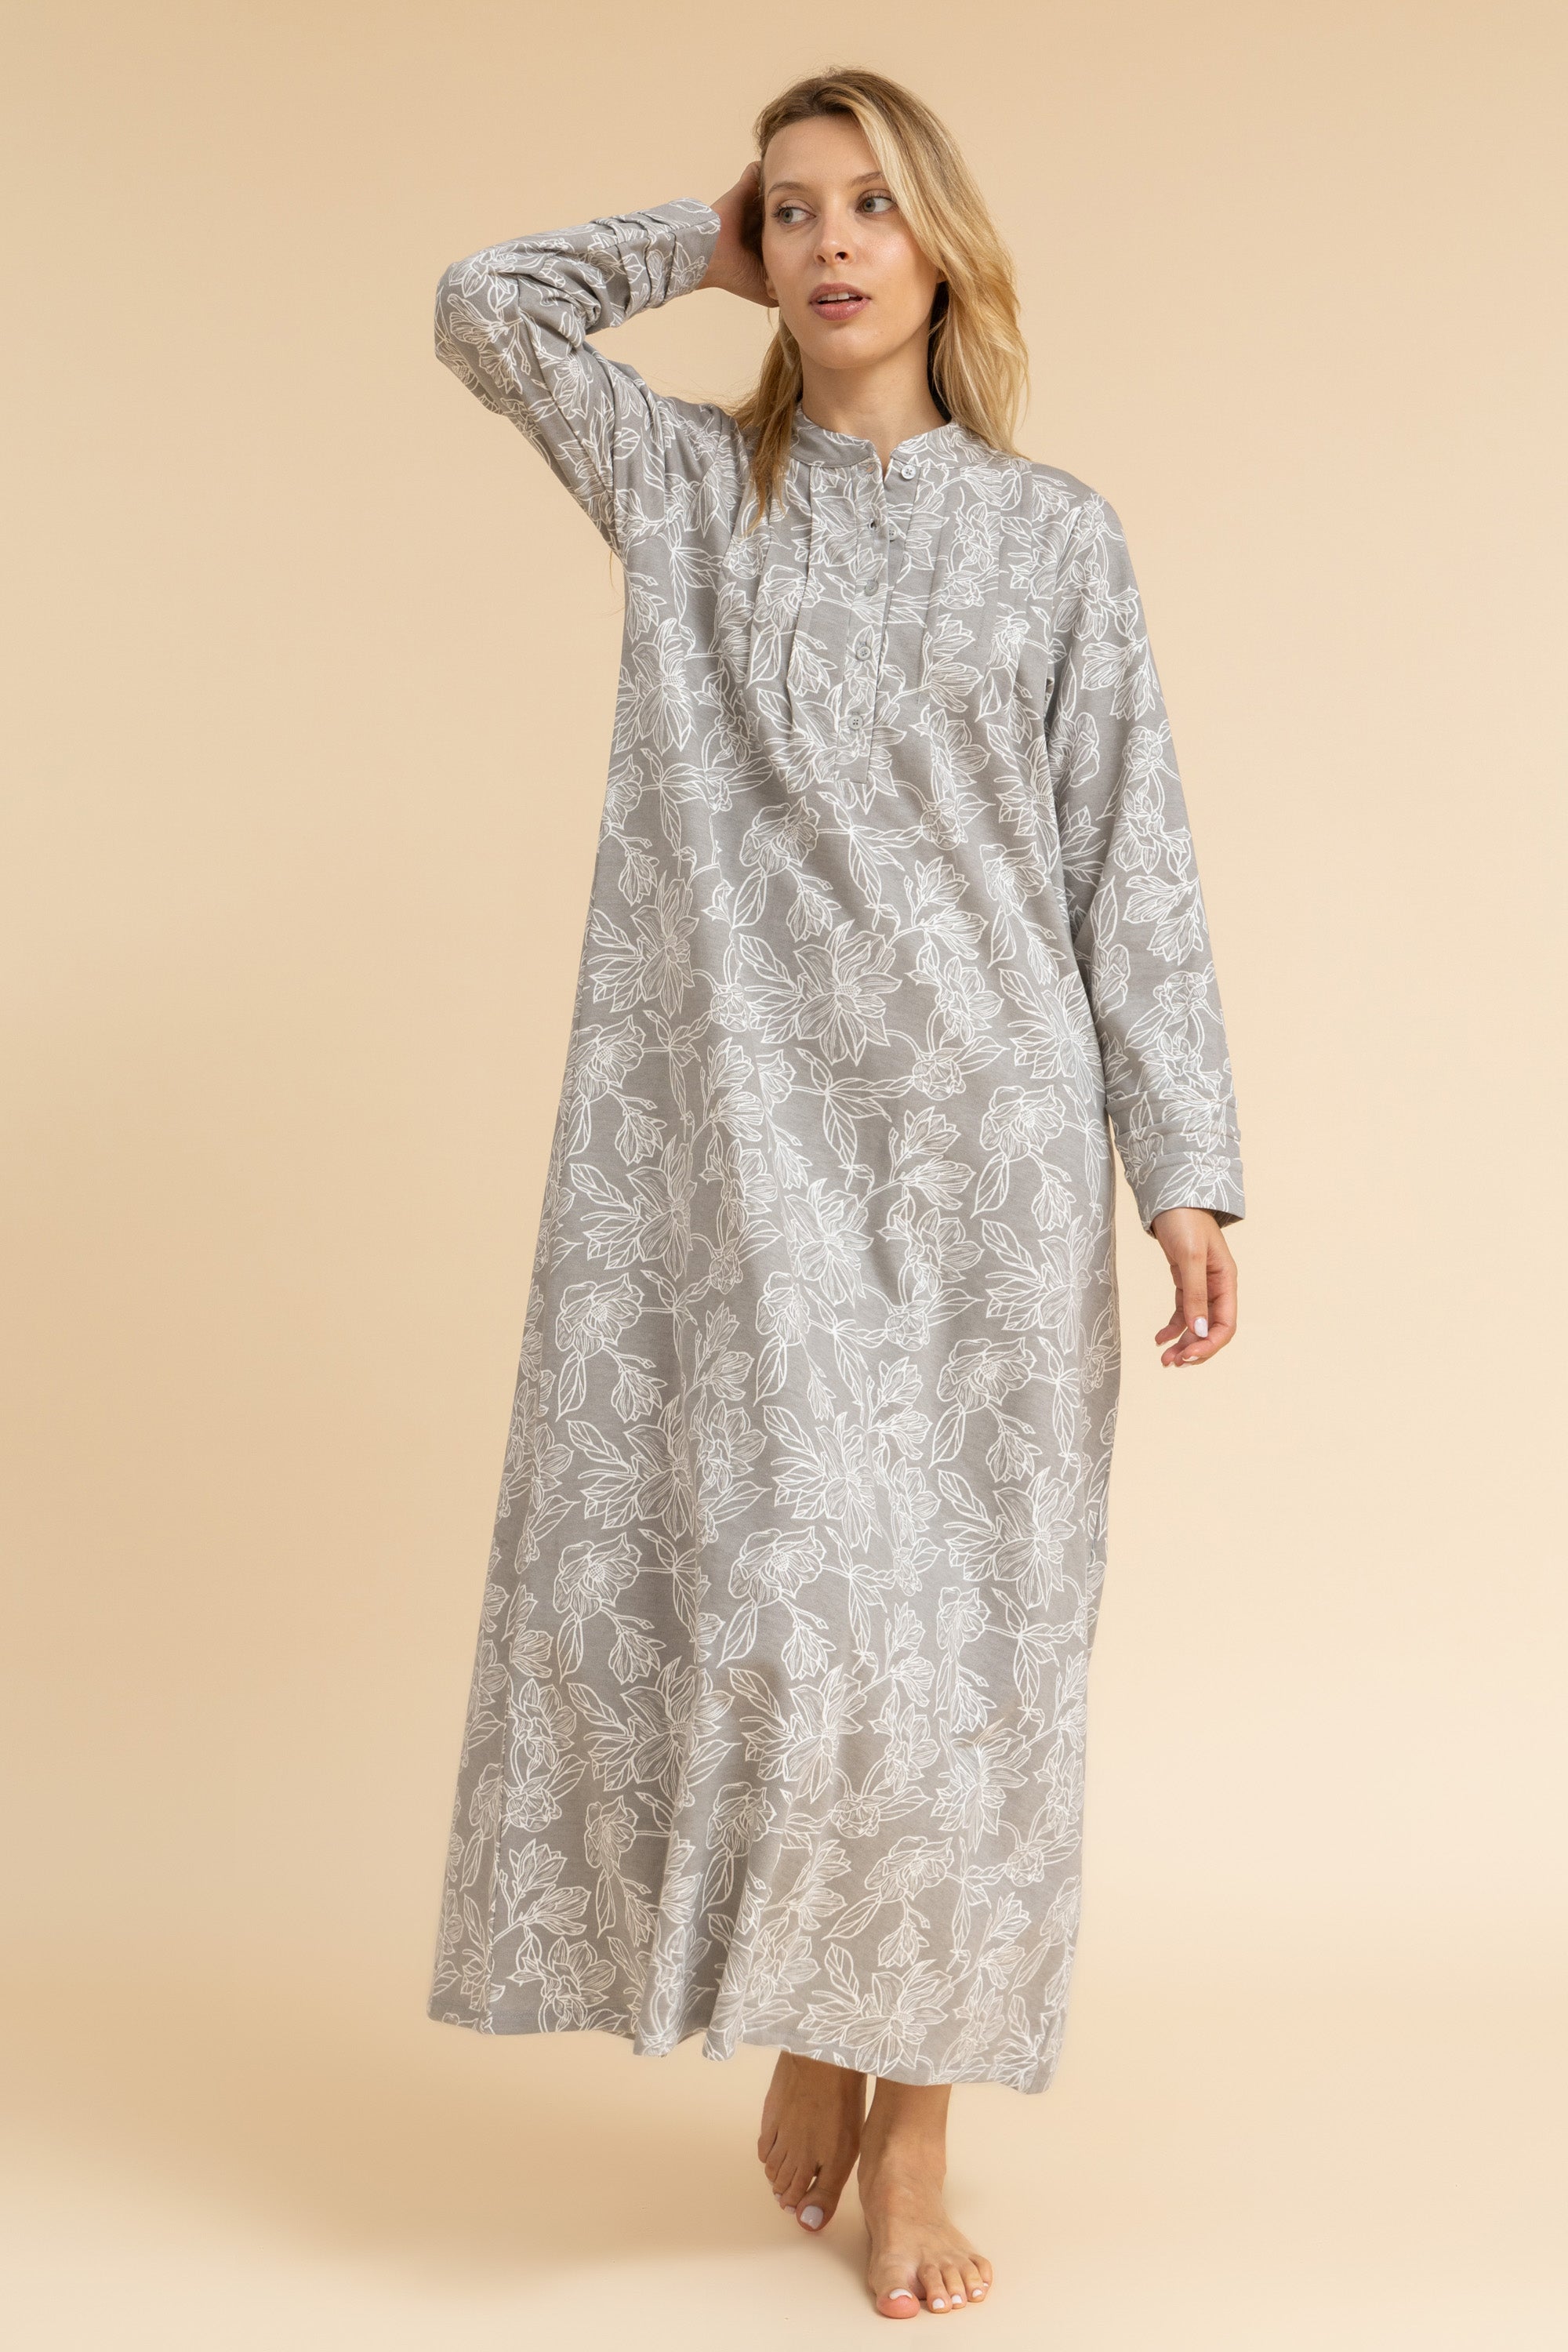 Floral Print 100% cotton nightgown with button detail